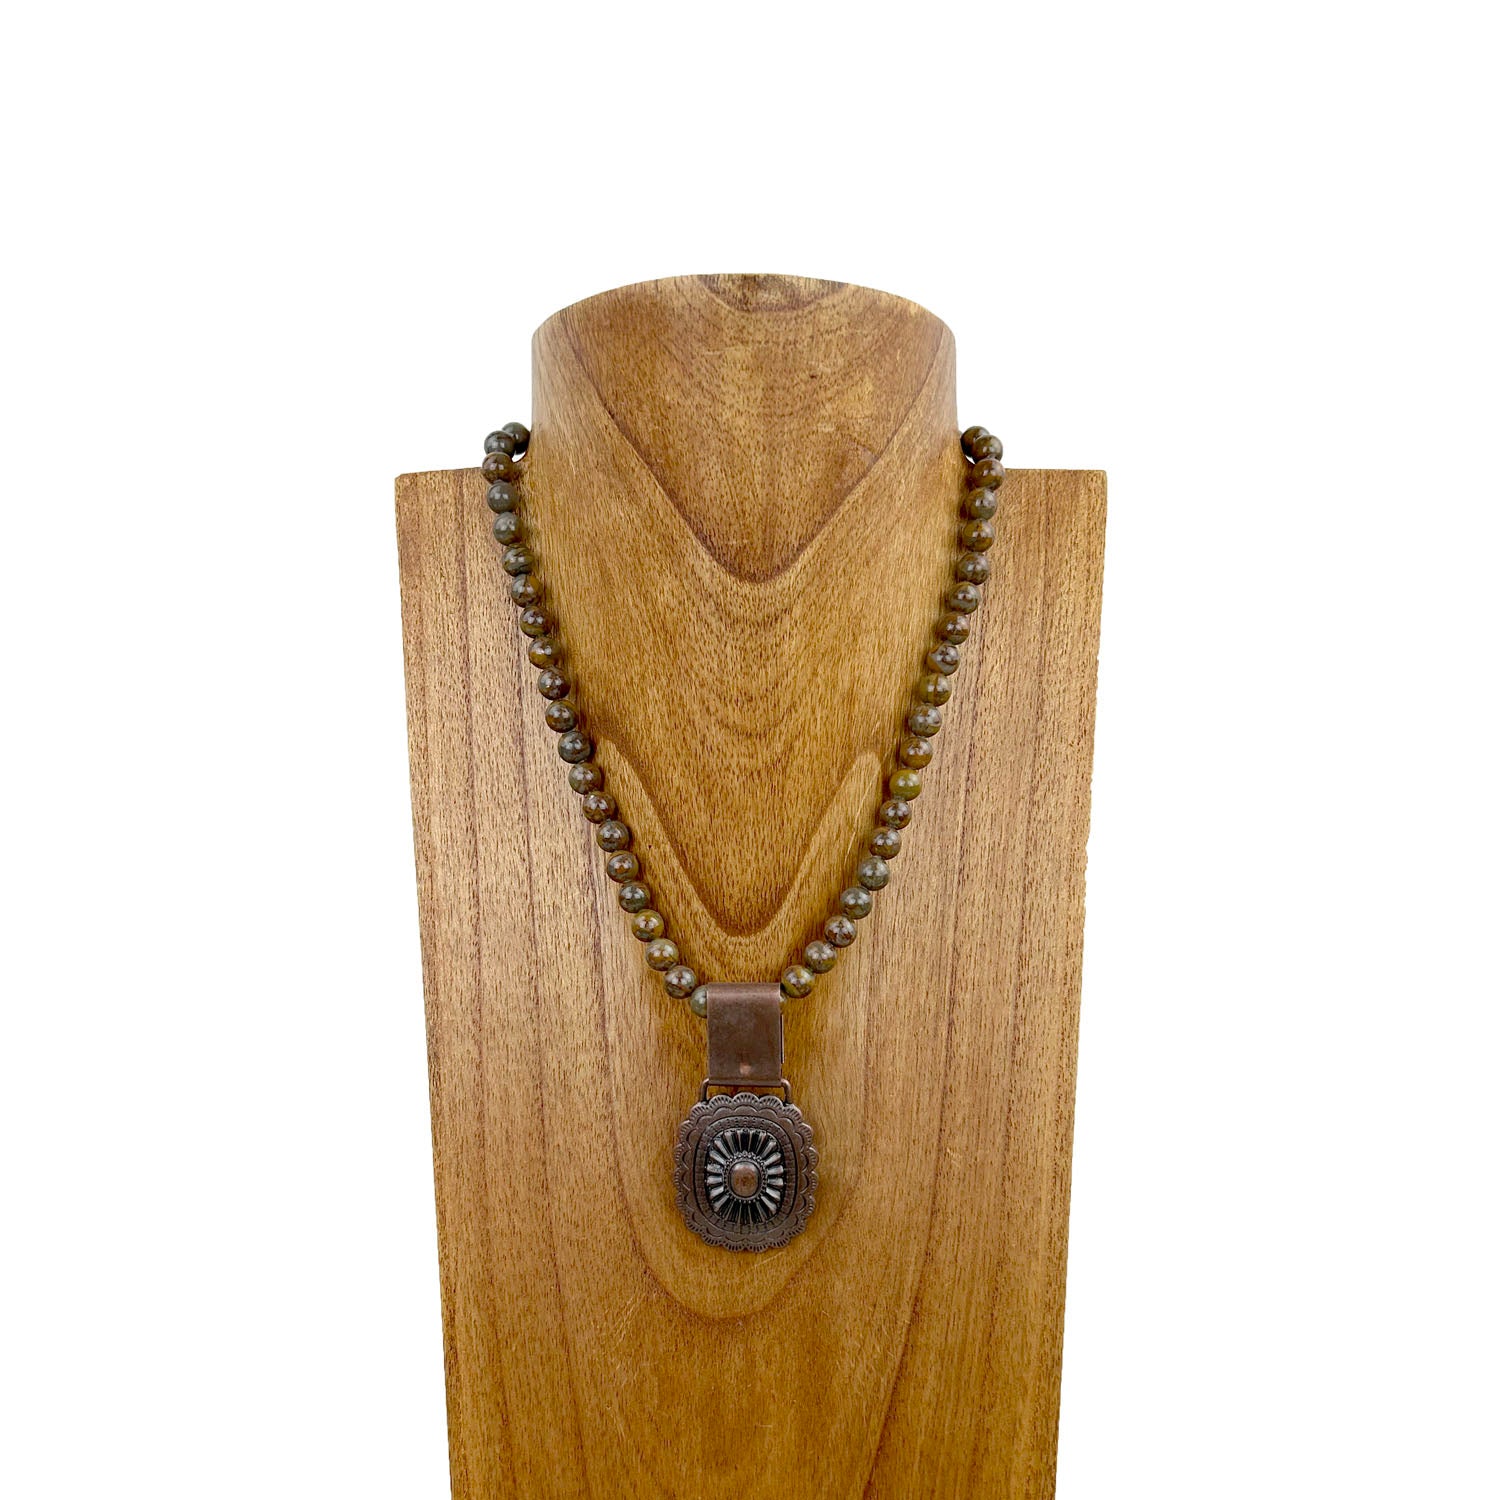 NKS230708-11	"18 inches long brown jasper stone with copper metal concho  pendant Necklace"